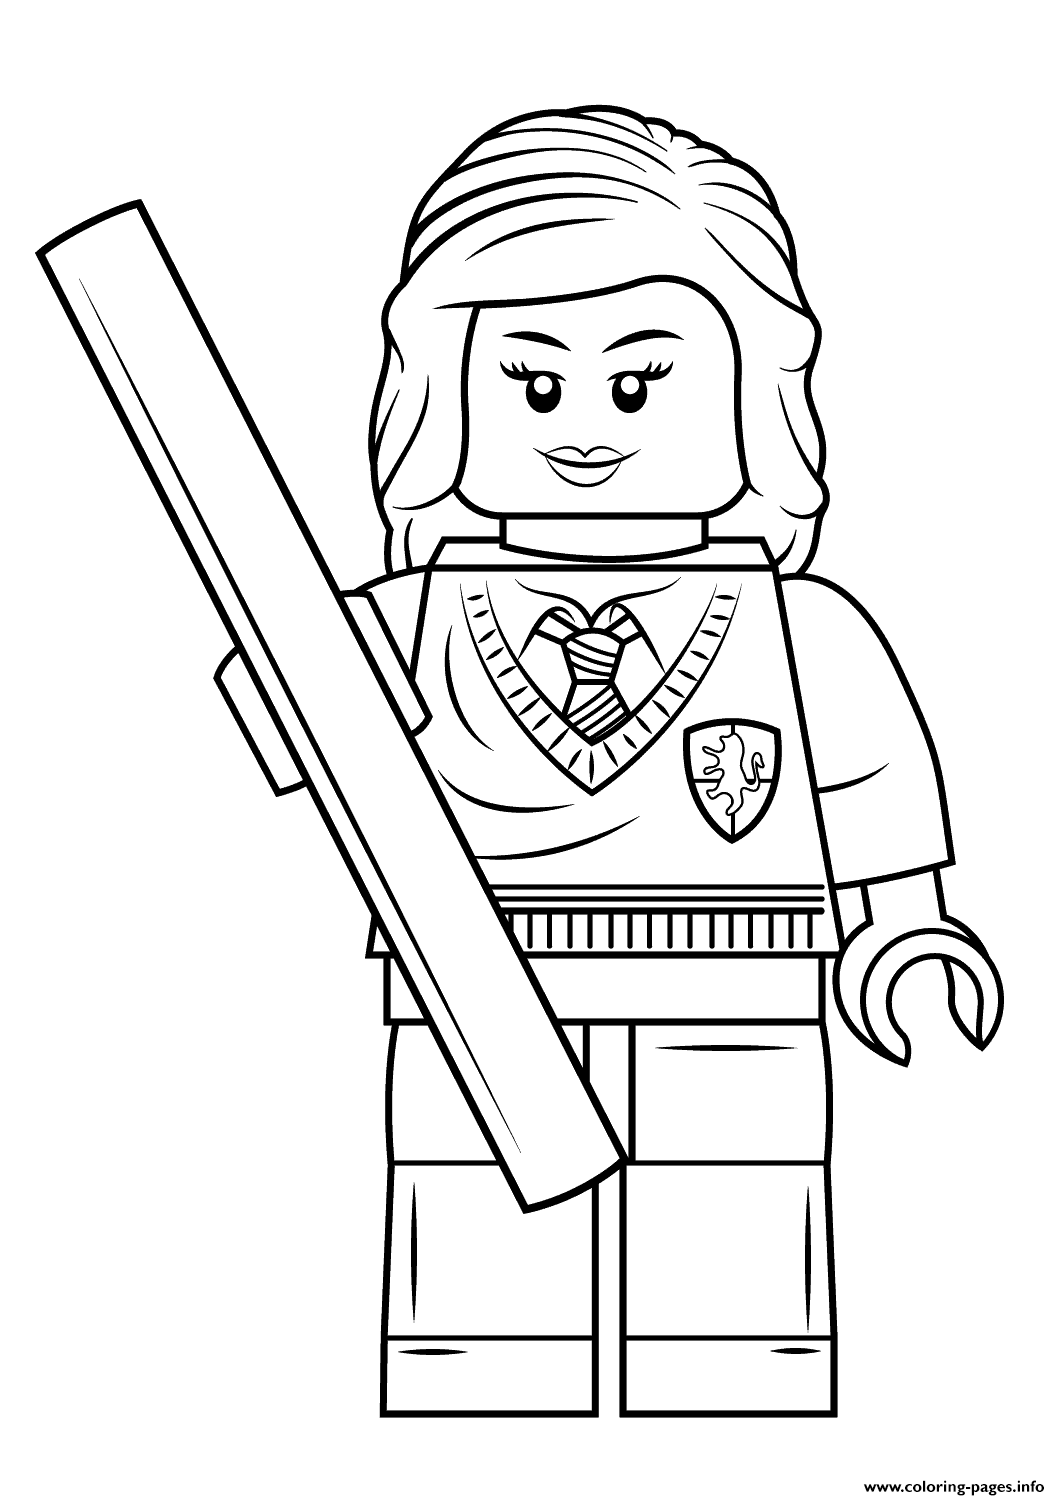 free-lego-harry-potter-coloring-pages-download-free-lego-harry-potter